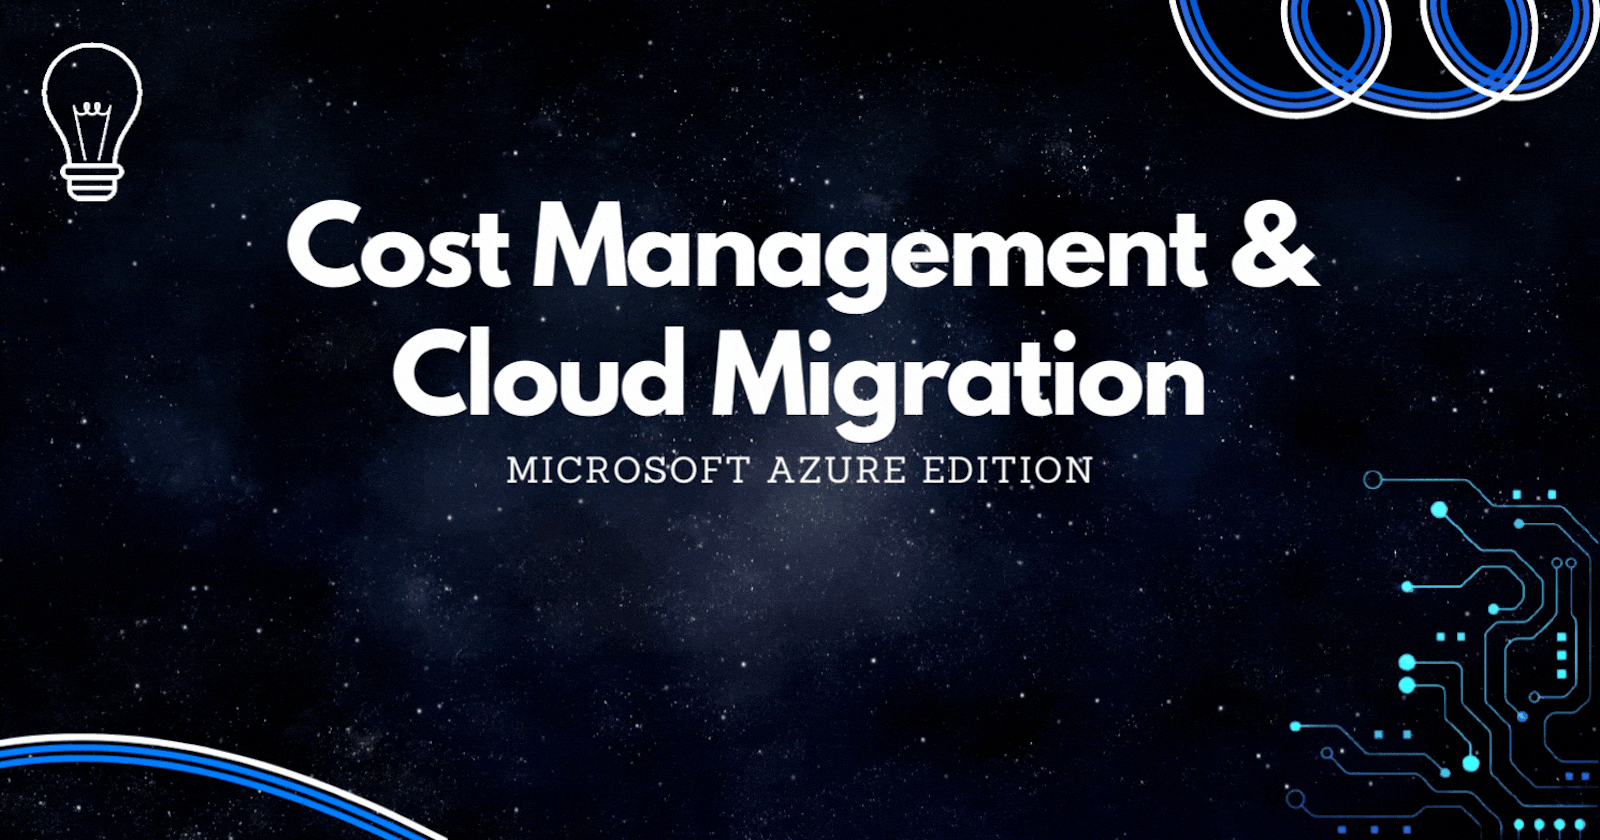 Cost Management and Cloud Migration | Microsoft Azure Edition